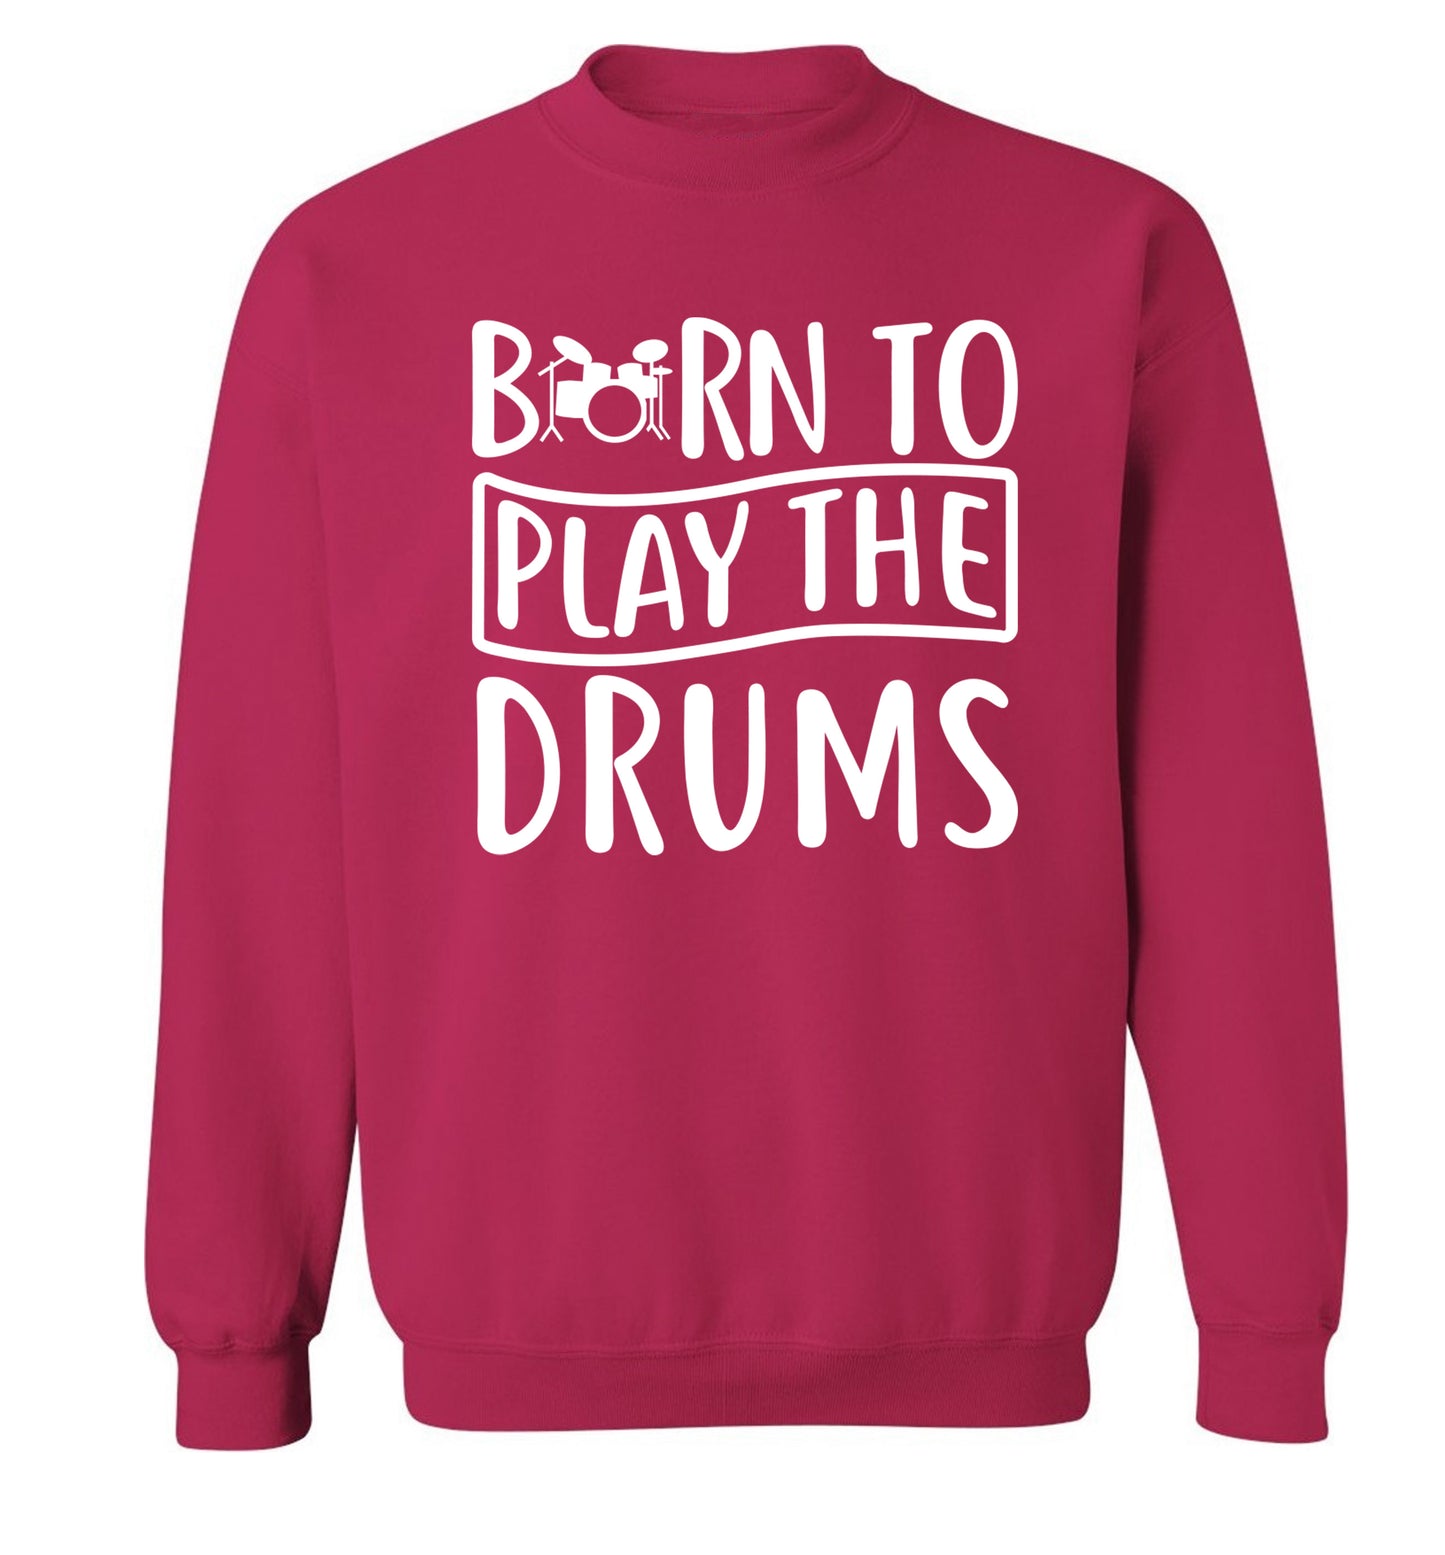 Born to play the drums Adult's unisex pink Sweater 2XL